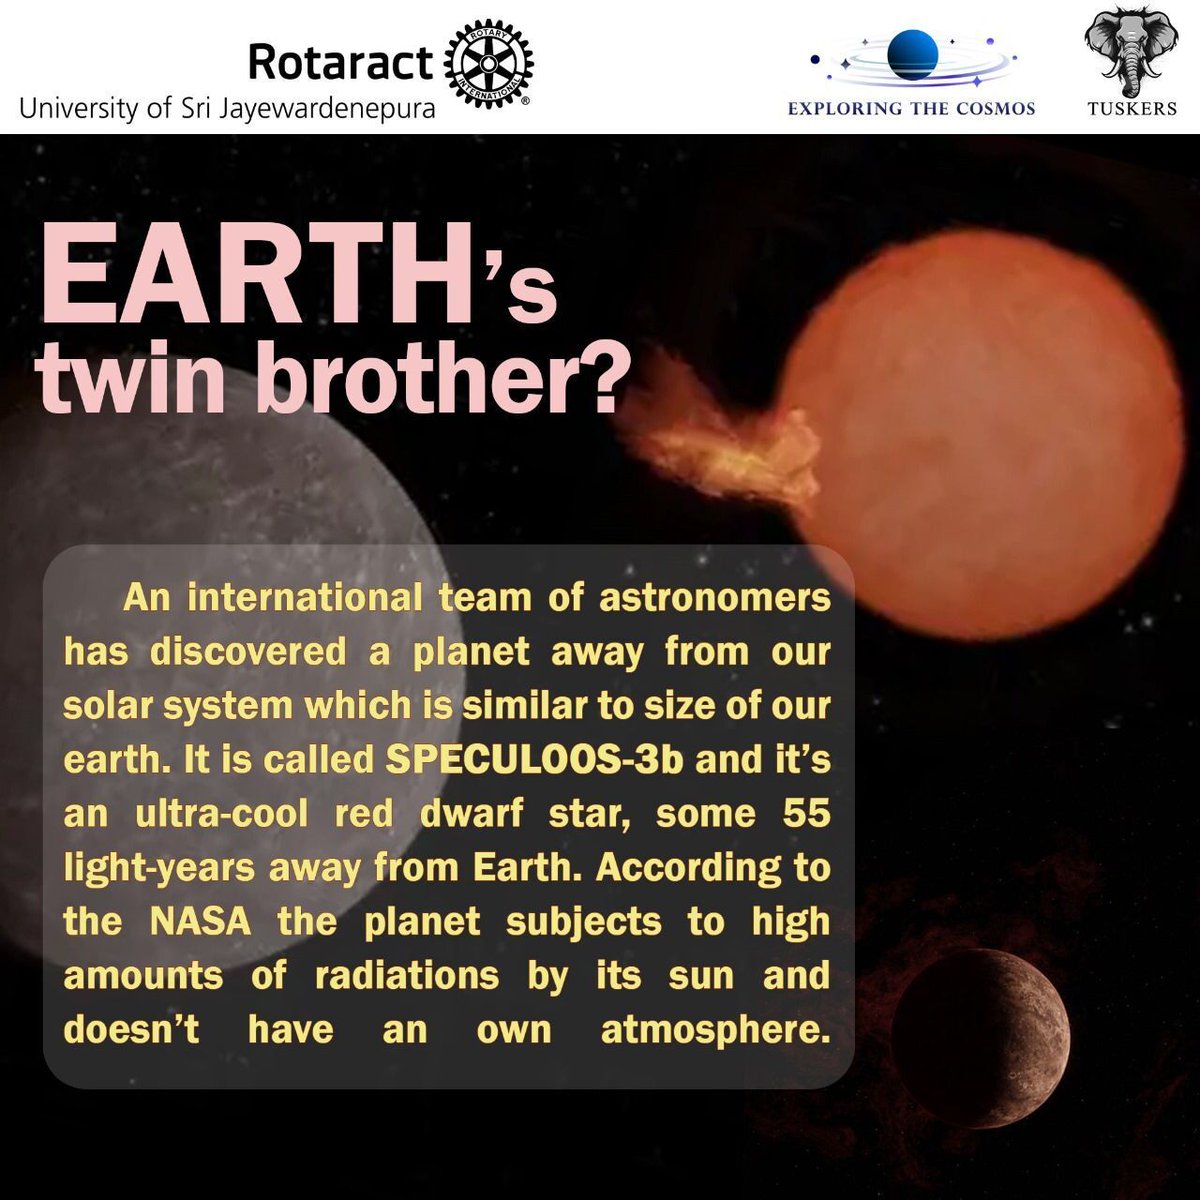 Meet SPECULOOS-3b: Earth-sized and ultra cool, yet a hotbed of radiation without its own atmosphere.

Source : astronomy.com/science/found-…

#ExploringtheCosmos
#RACUSJ 
#Rotaract 
#Rotaract3220 
#CreateHopeintheWorld 
#YouthForAll